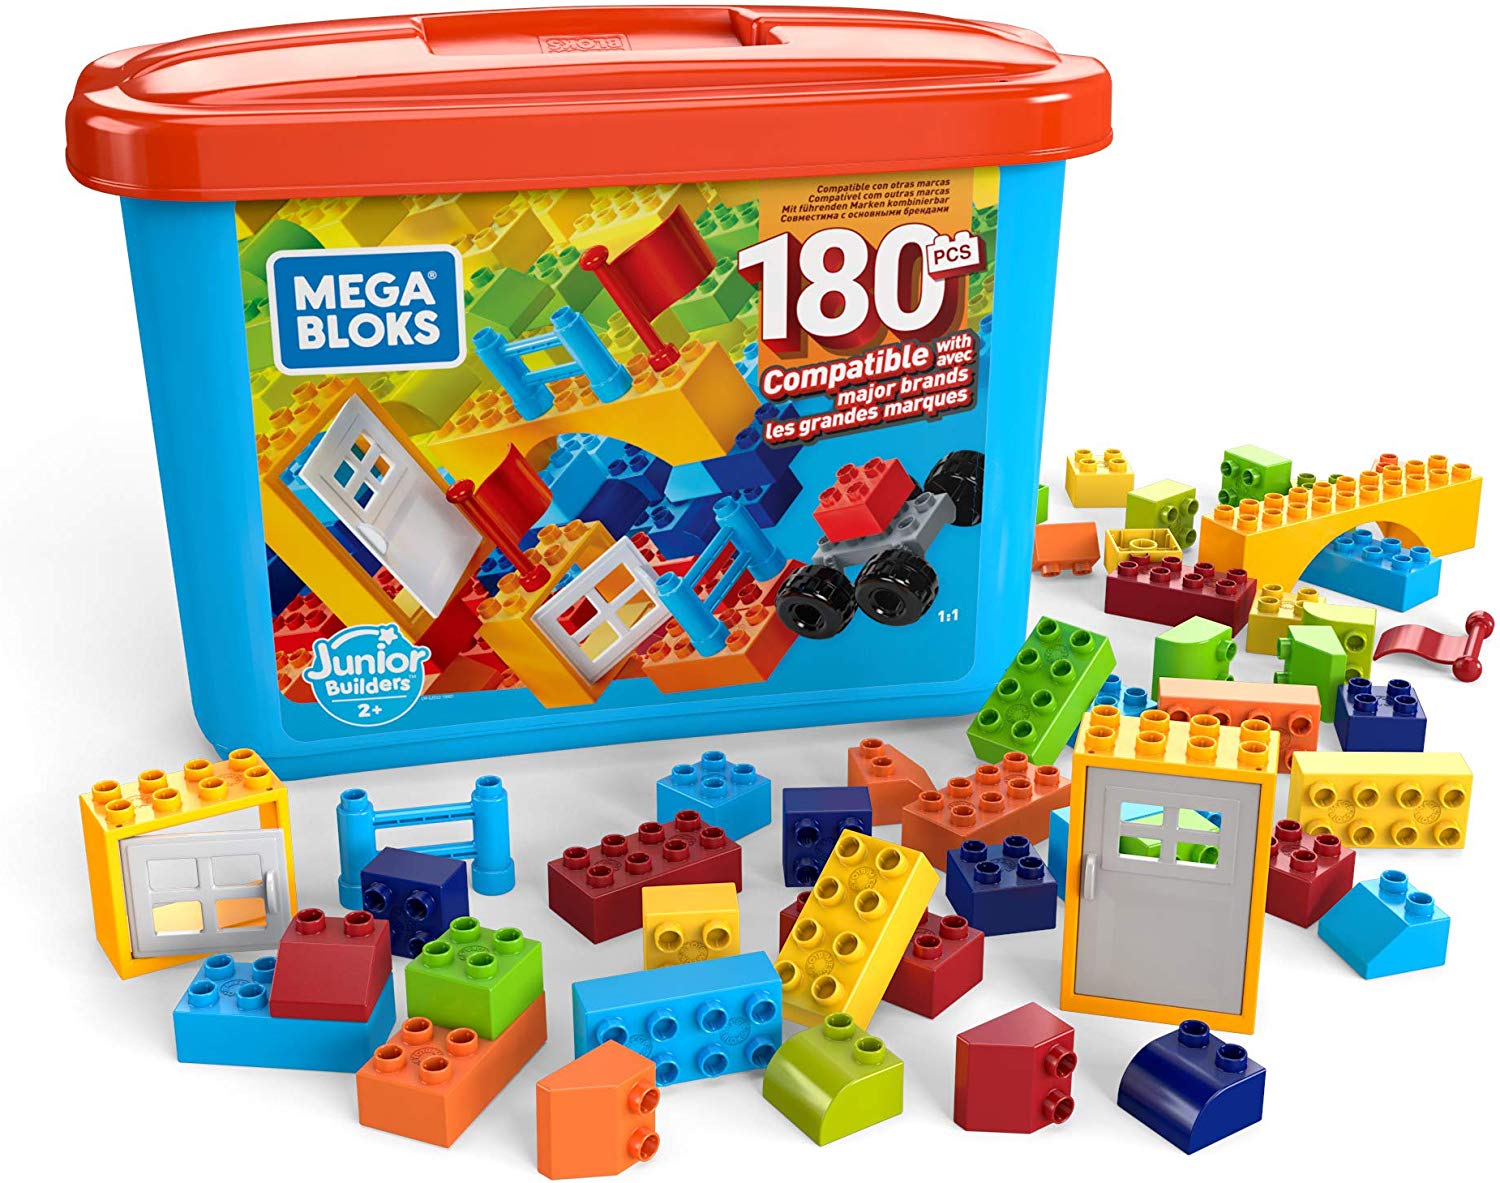 Mega Bloks Building Blocks Box with 100 and 180 Pieces for Kids Toys 2 Year